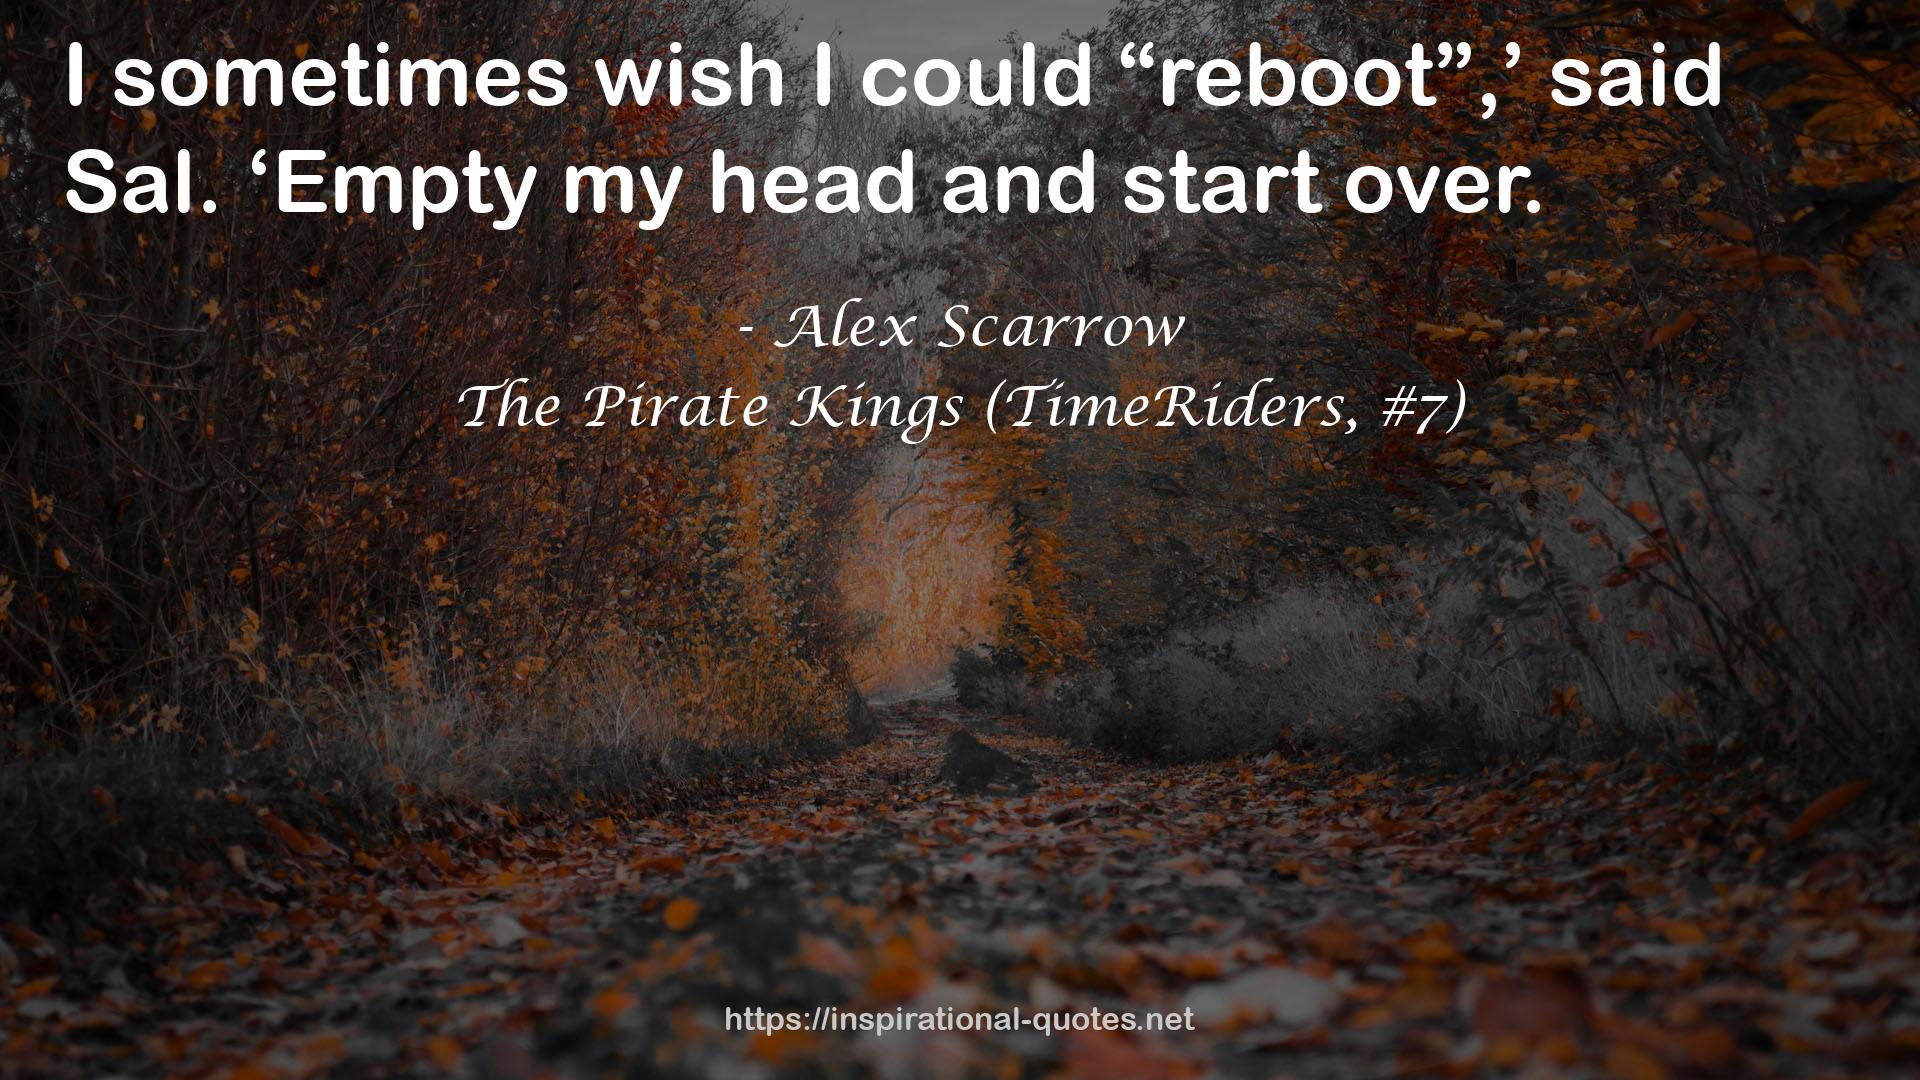 The Pirate Kings (TimeRiders, #7) QUOTES